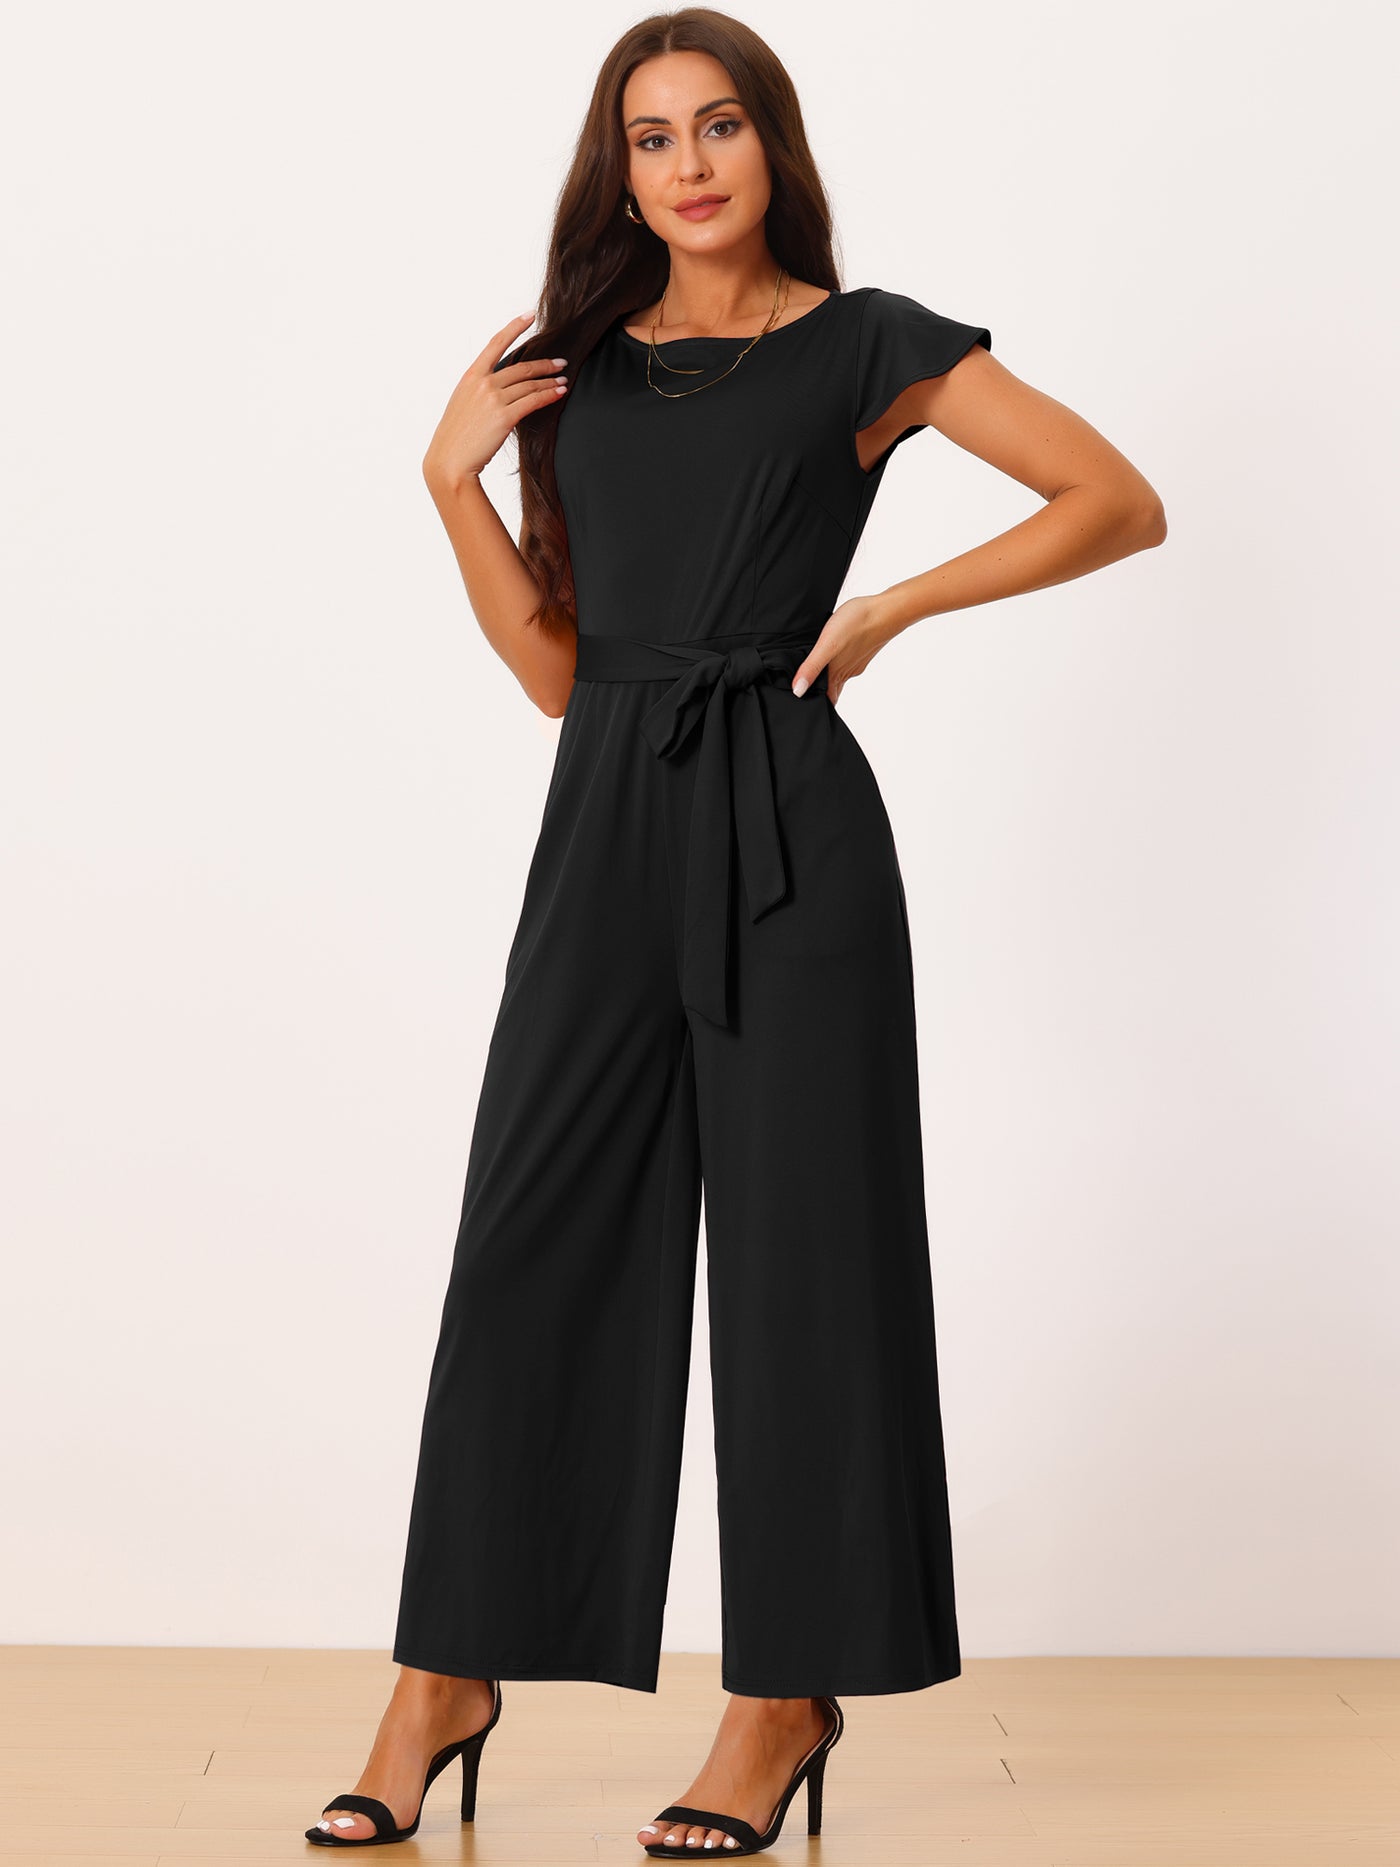 Bublédon Women's Crew Neck Ruffle Cap Sleeve Belted High Waist Wide Leg Casual Dressy Jumpsuits with Pockets